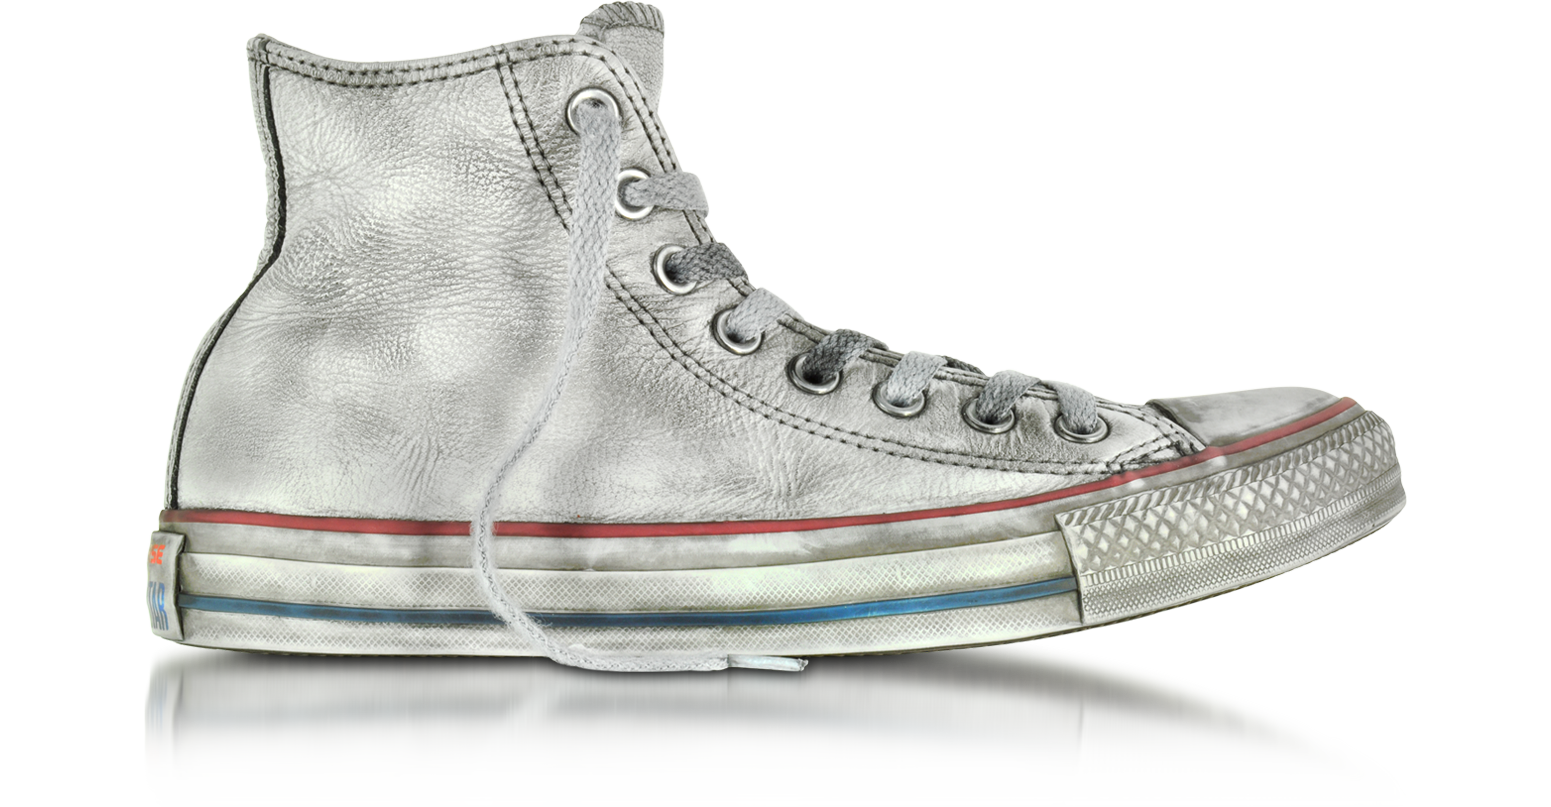 Converse Limited Edition All Star High Concrete Smoke Leather LTD Unisex  Shoes 10 (11.5 WOMENS US | 10 UK | 44 EU) at FORZIERI